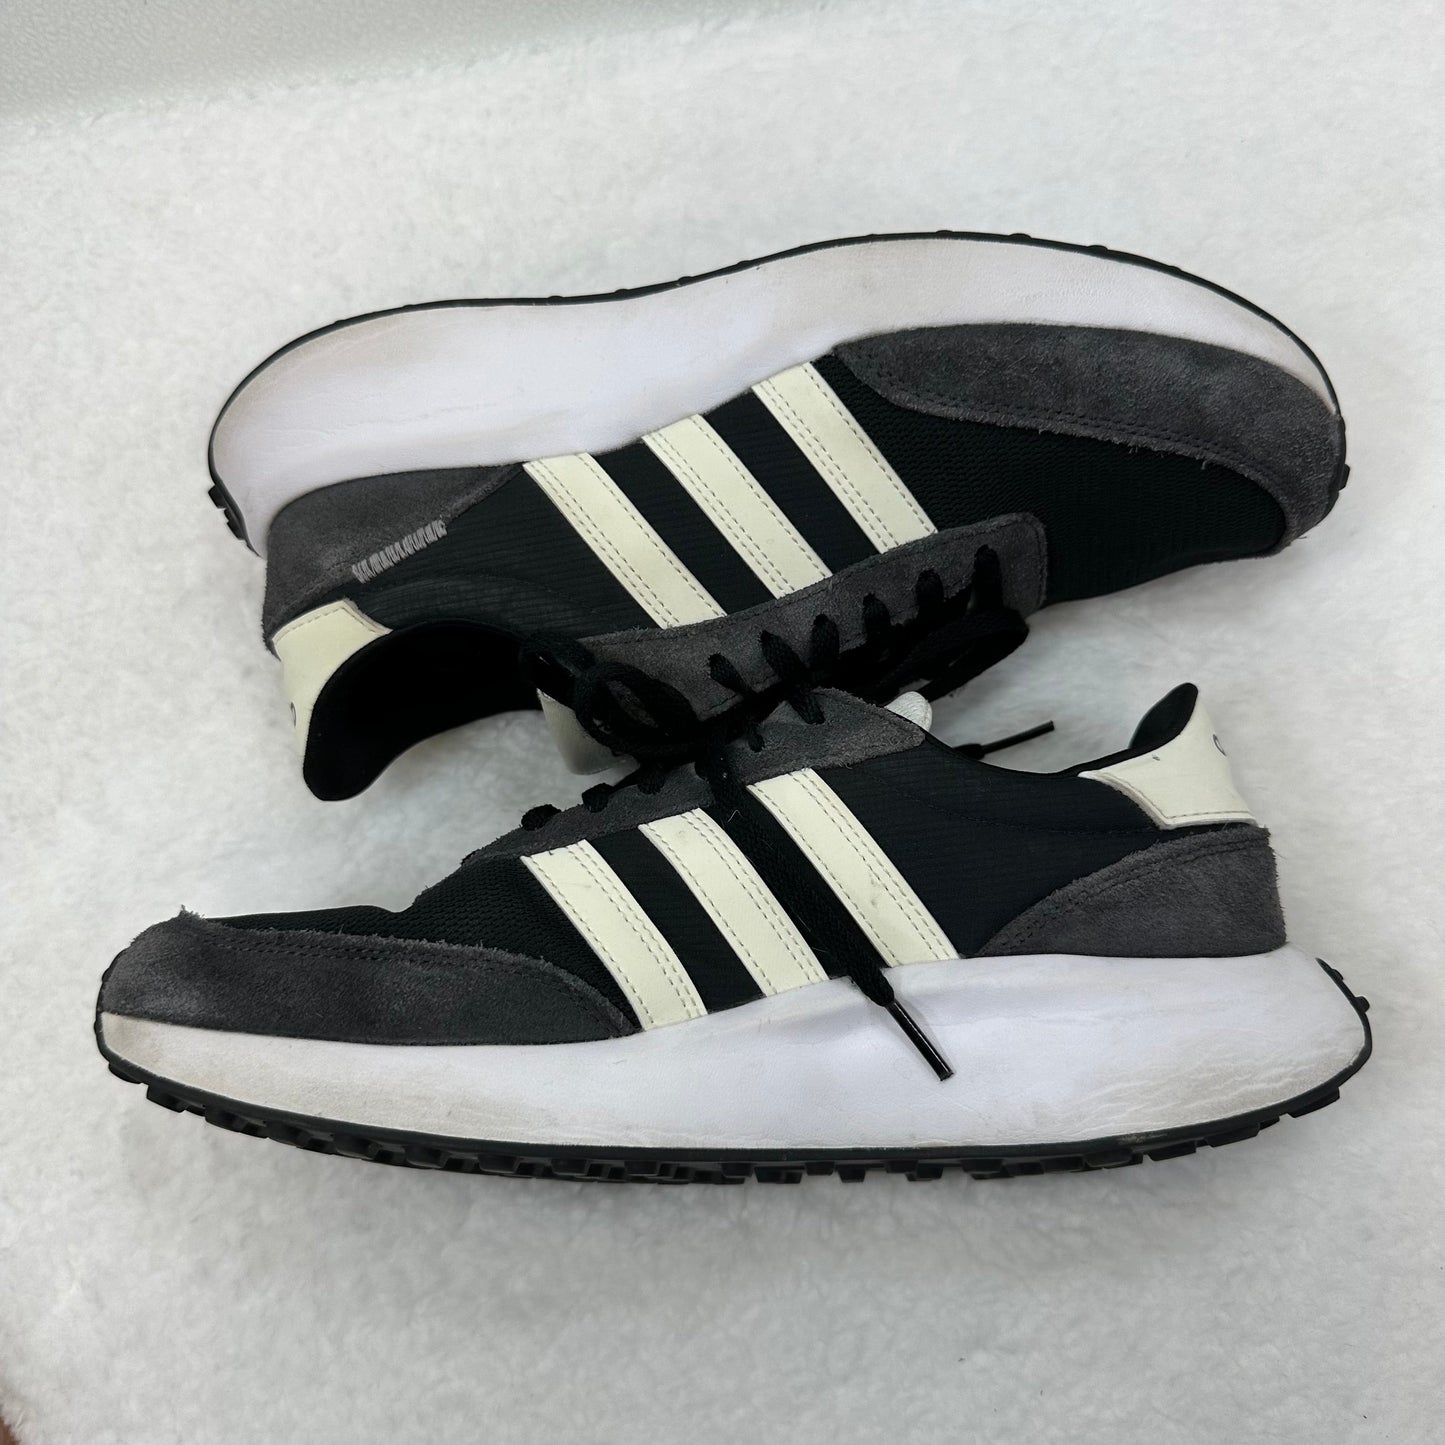 Shoes Sneakers By Adidas  Size: 9